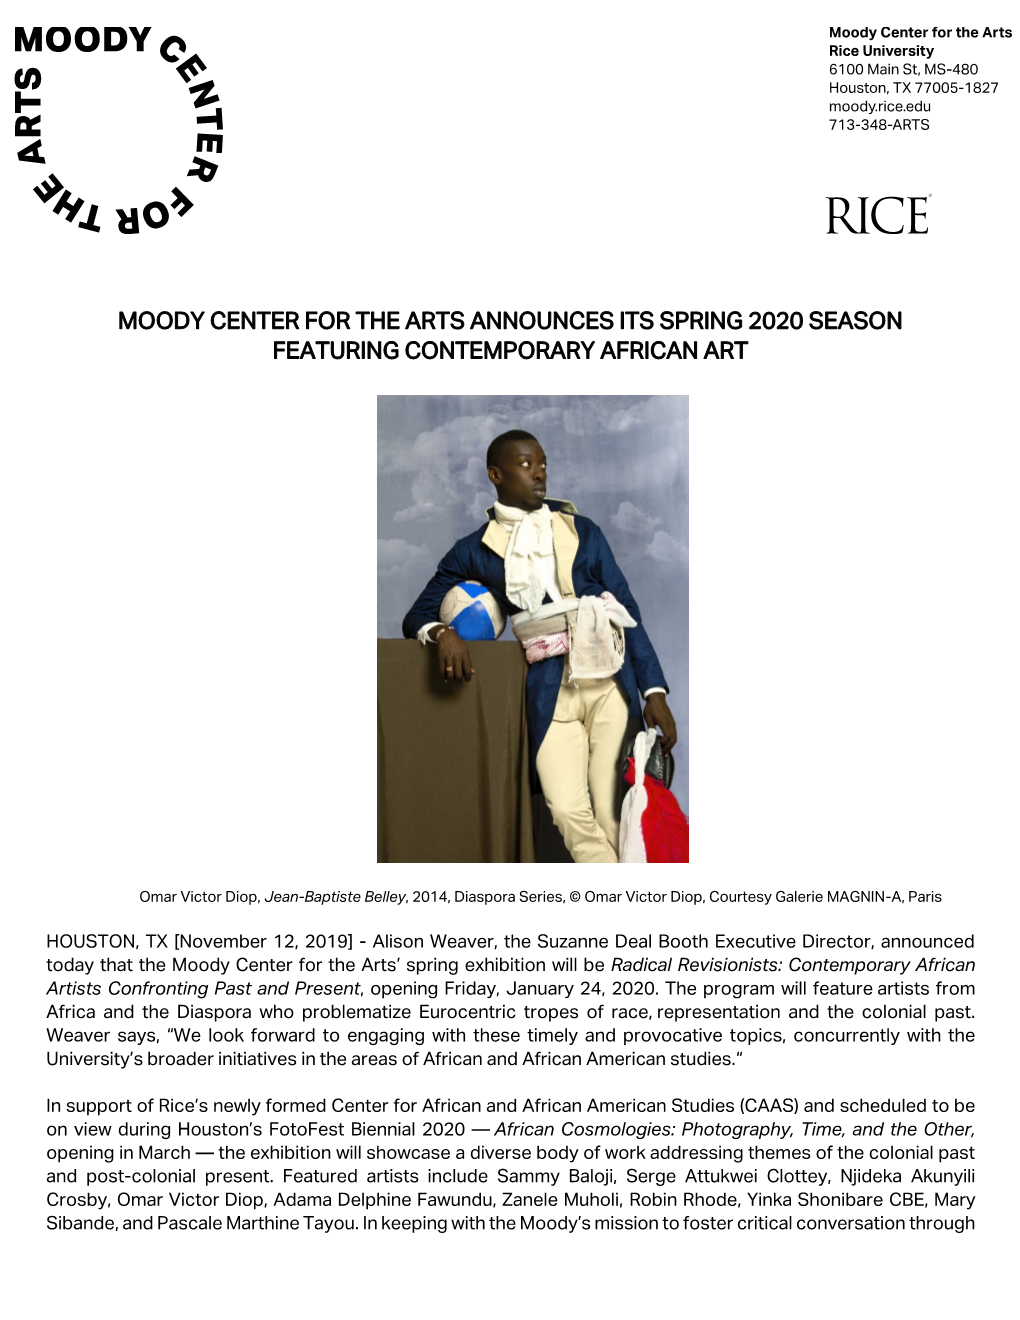 Moody Center for the Arts Announces Its Spring 2020 Season Featuring Contemporary African Art